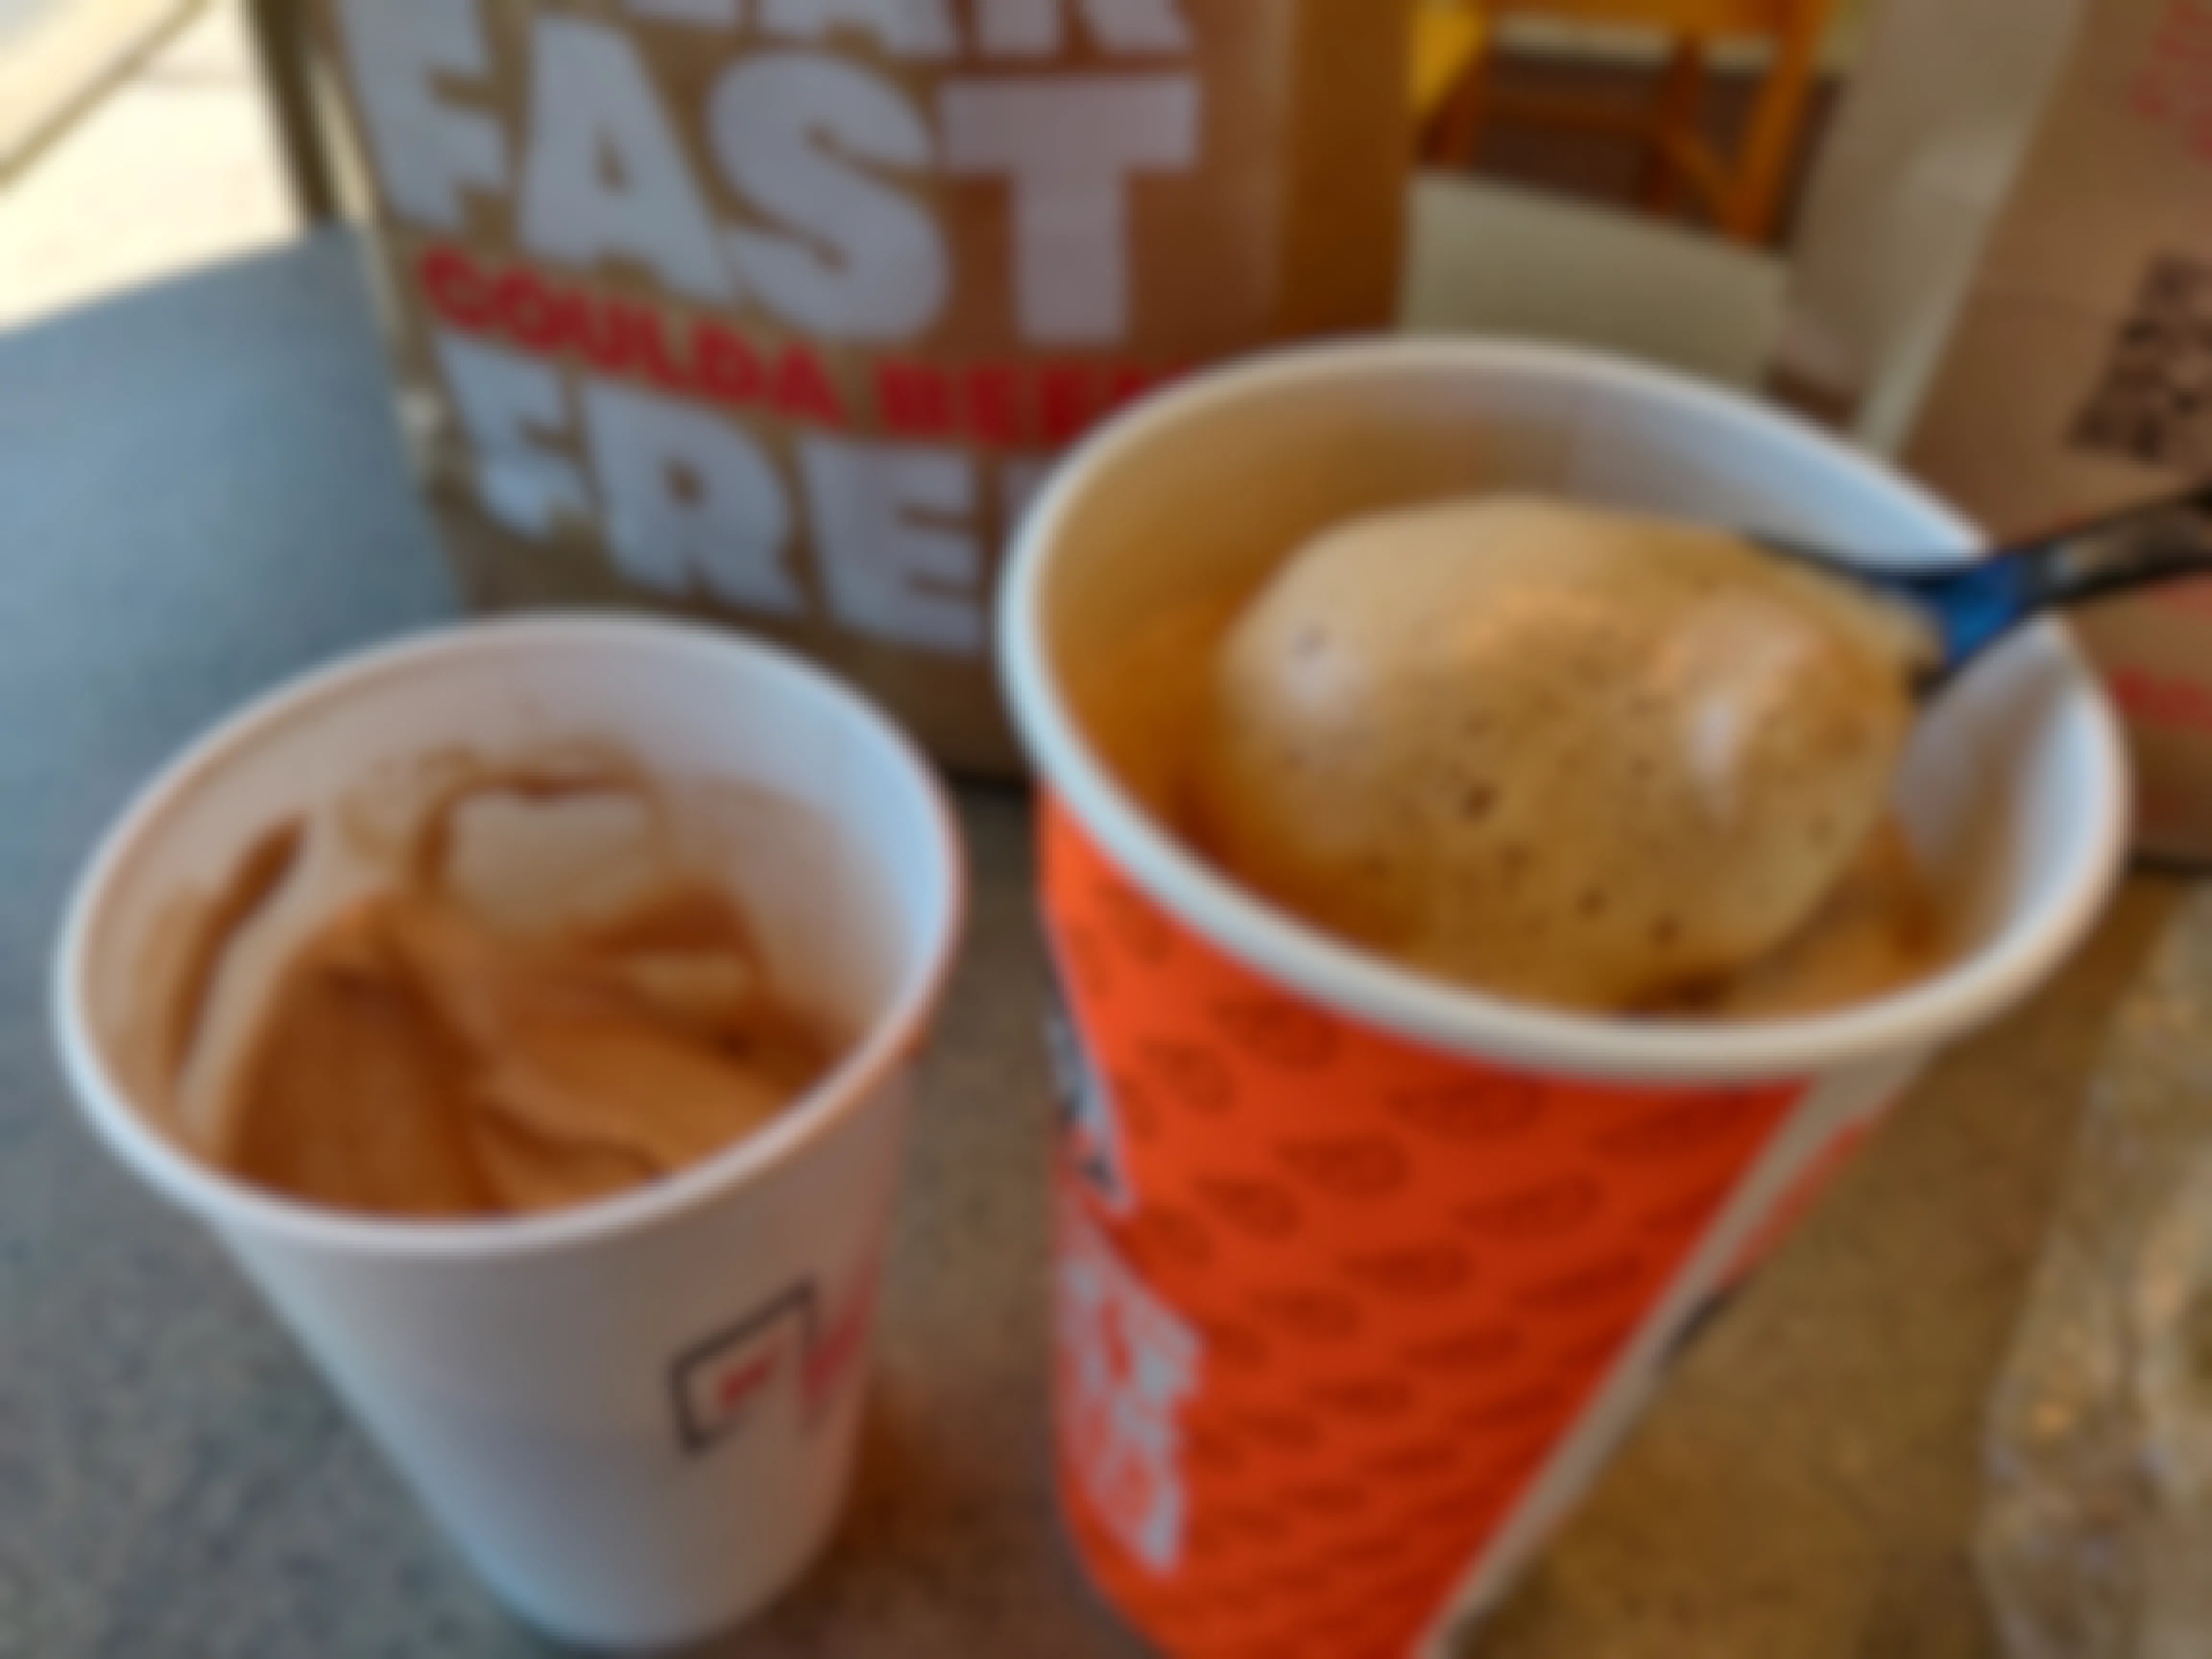 A Wendy's frosty and a Wendy's soda being mixed together with a spoon.